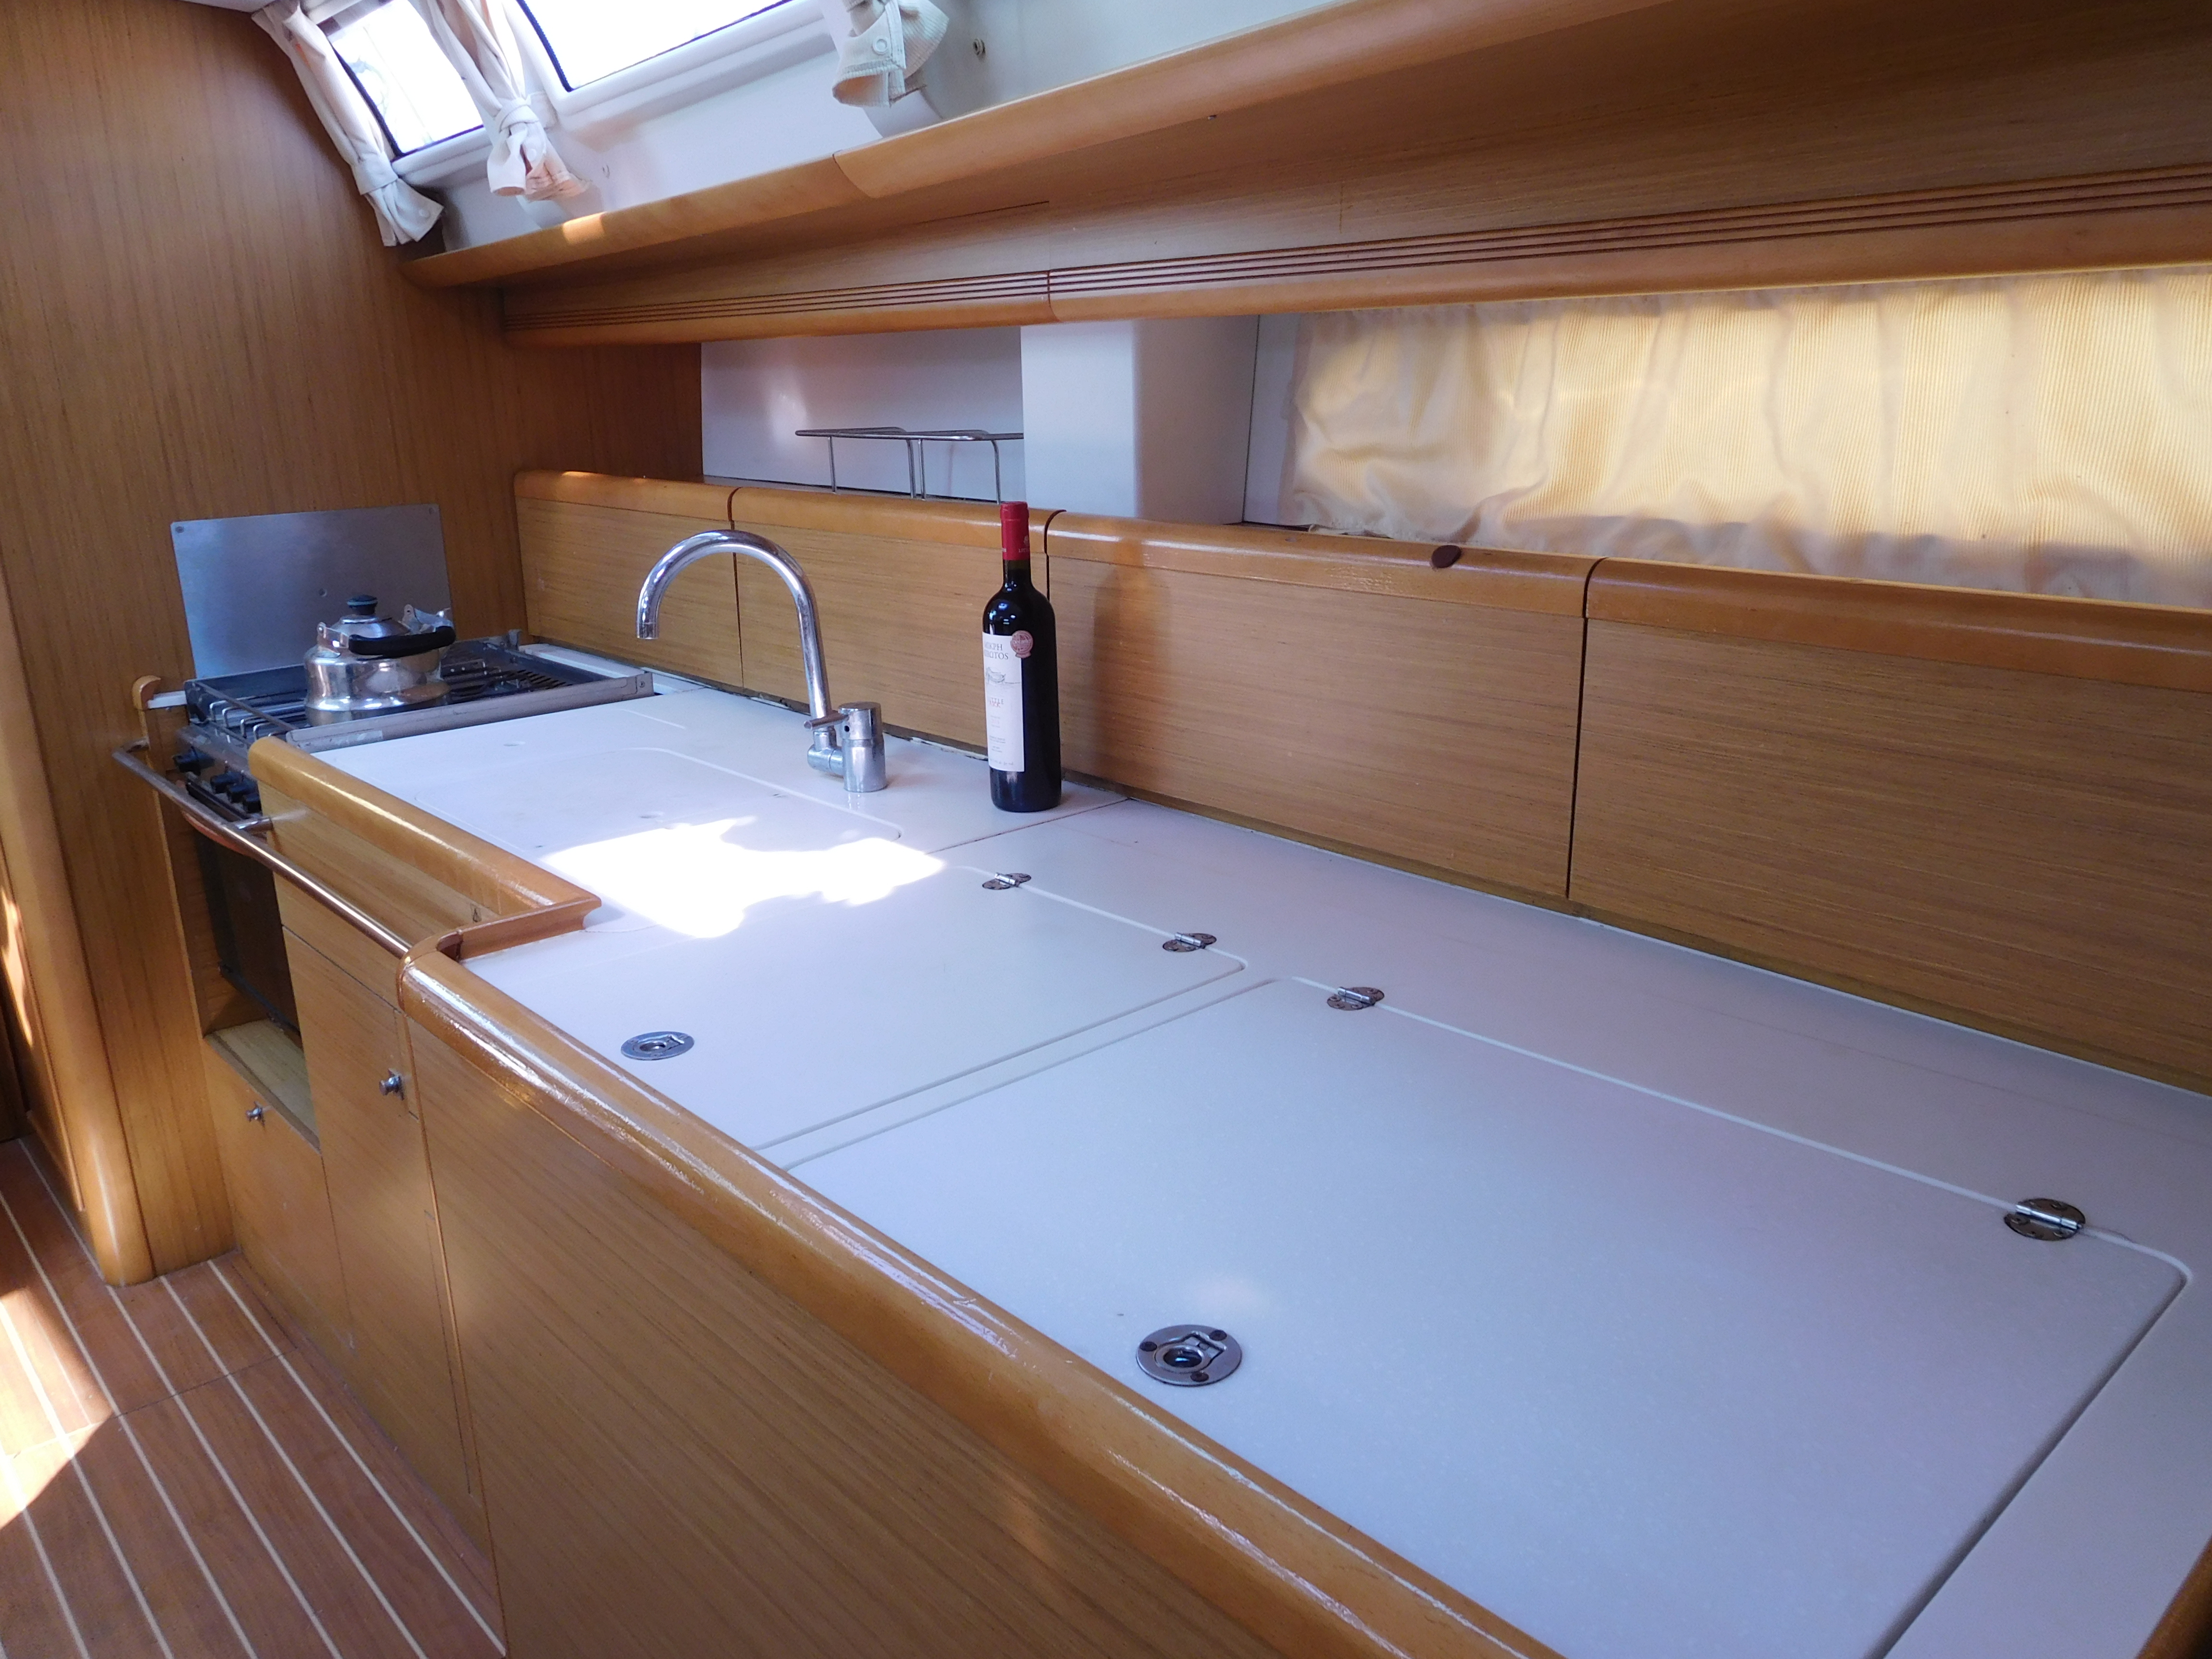 Sun Odyssey 44i Beethoven ( with Bowthruster ,Solar Panels) Innenansicht